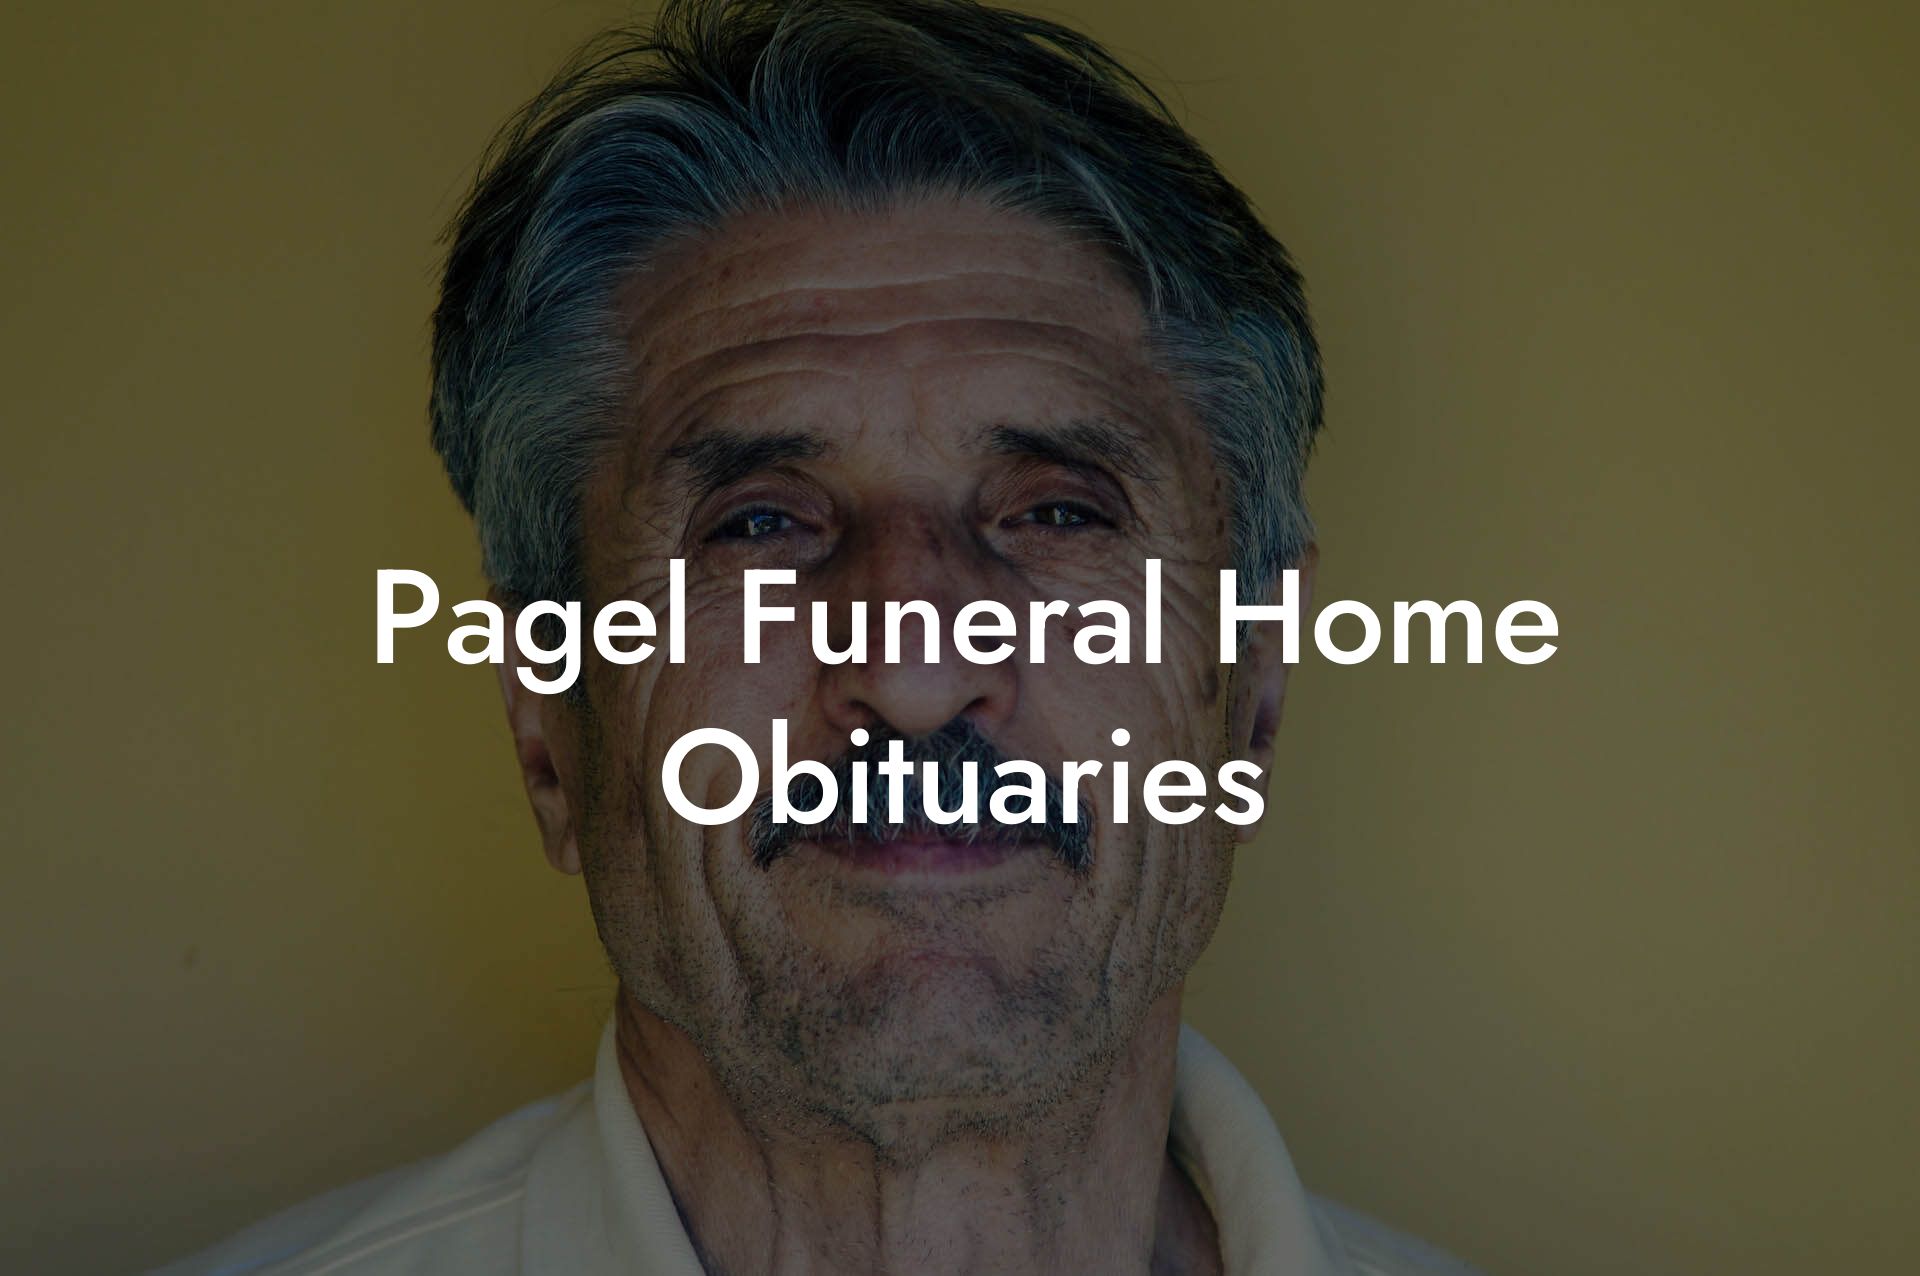 Pagel Funeral Home Obituaries